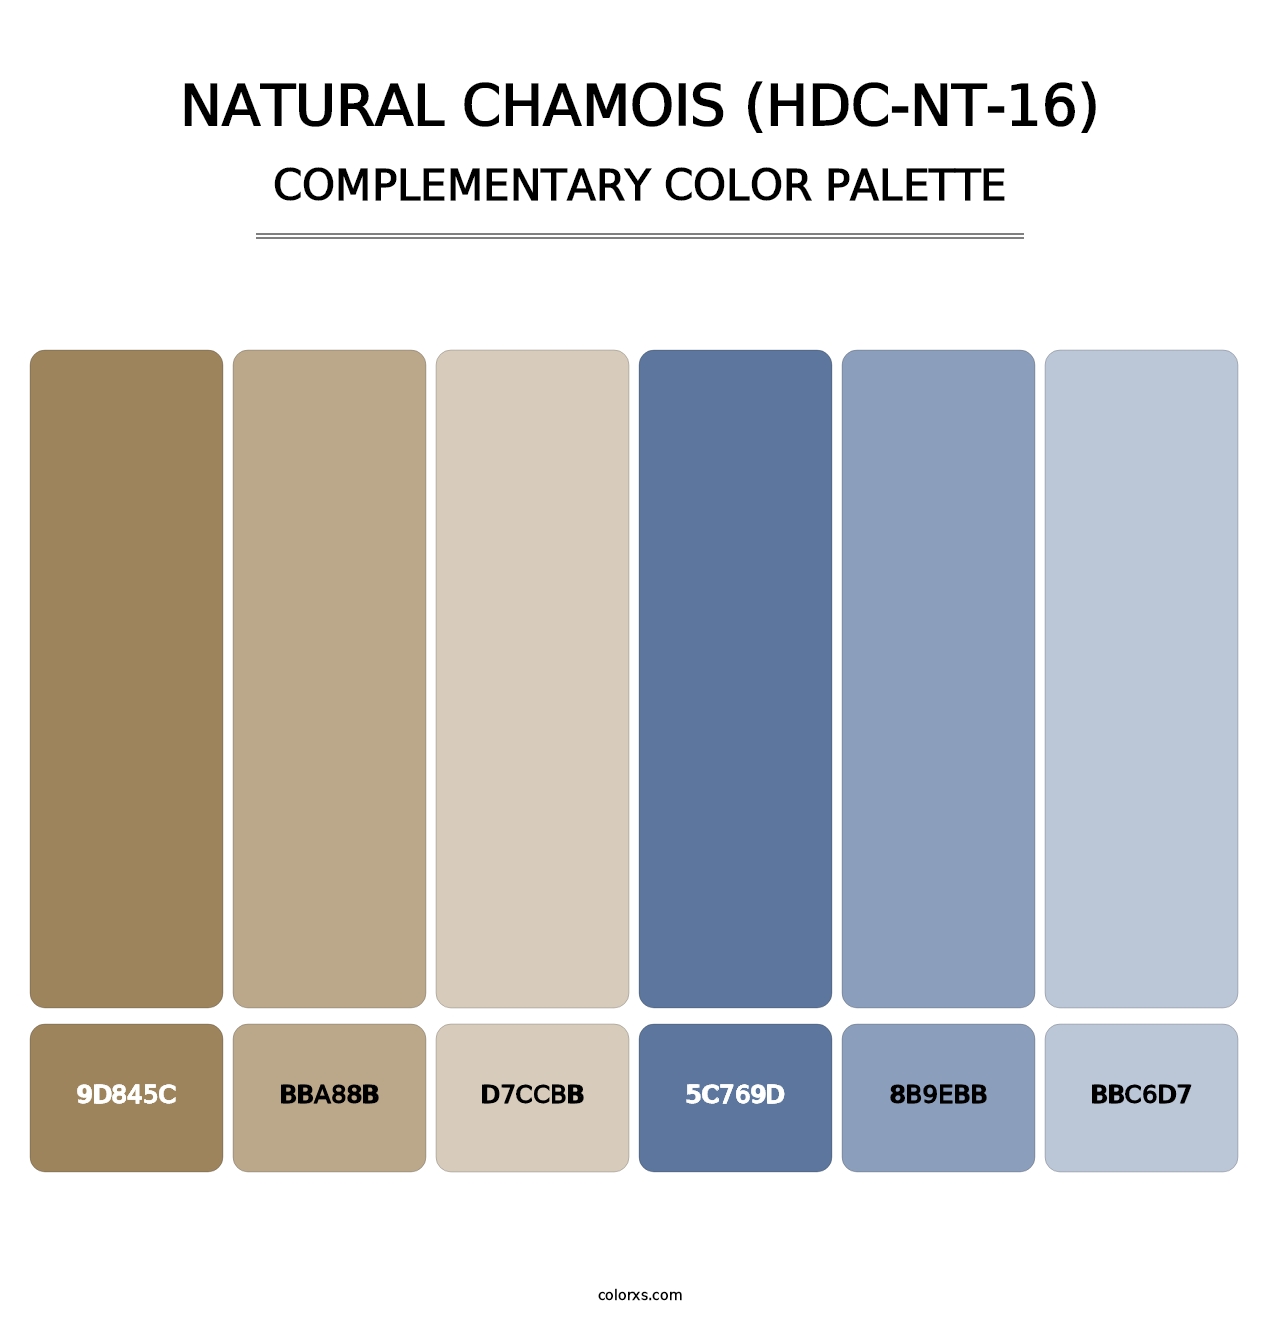 Natural Chamois (HDC-NT-16) - Complementary Color Palette